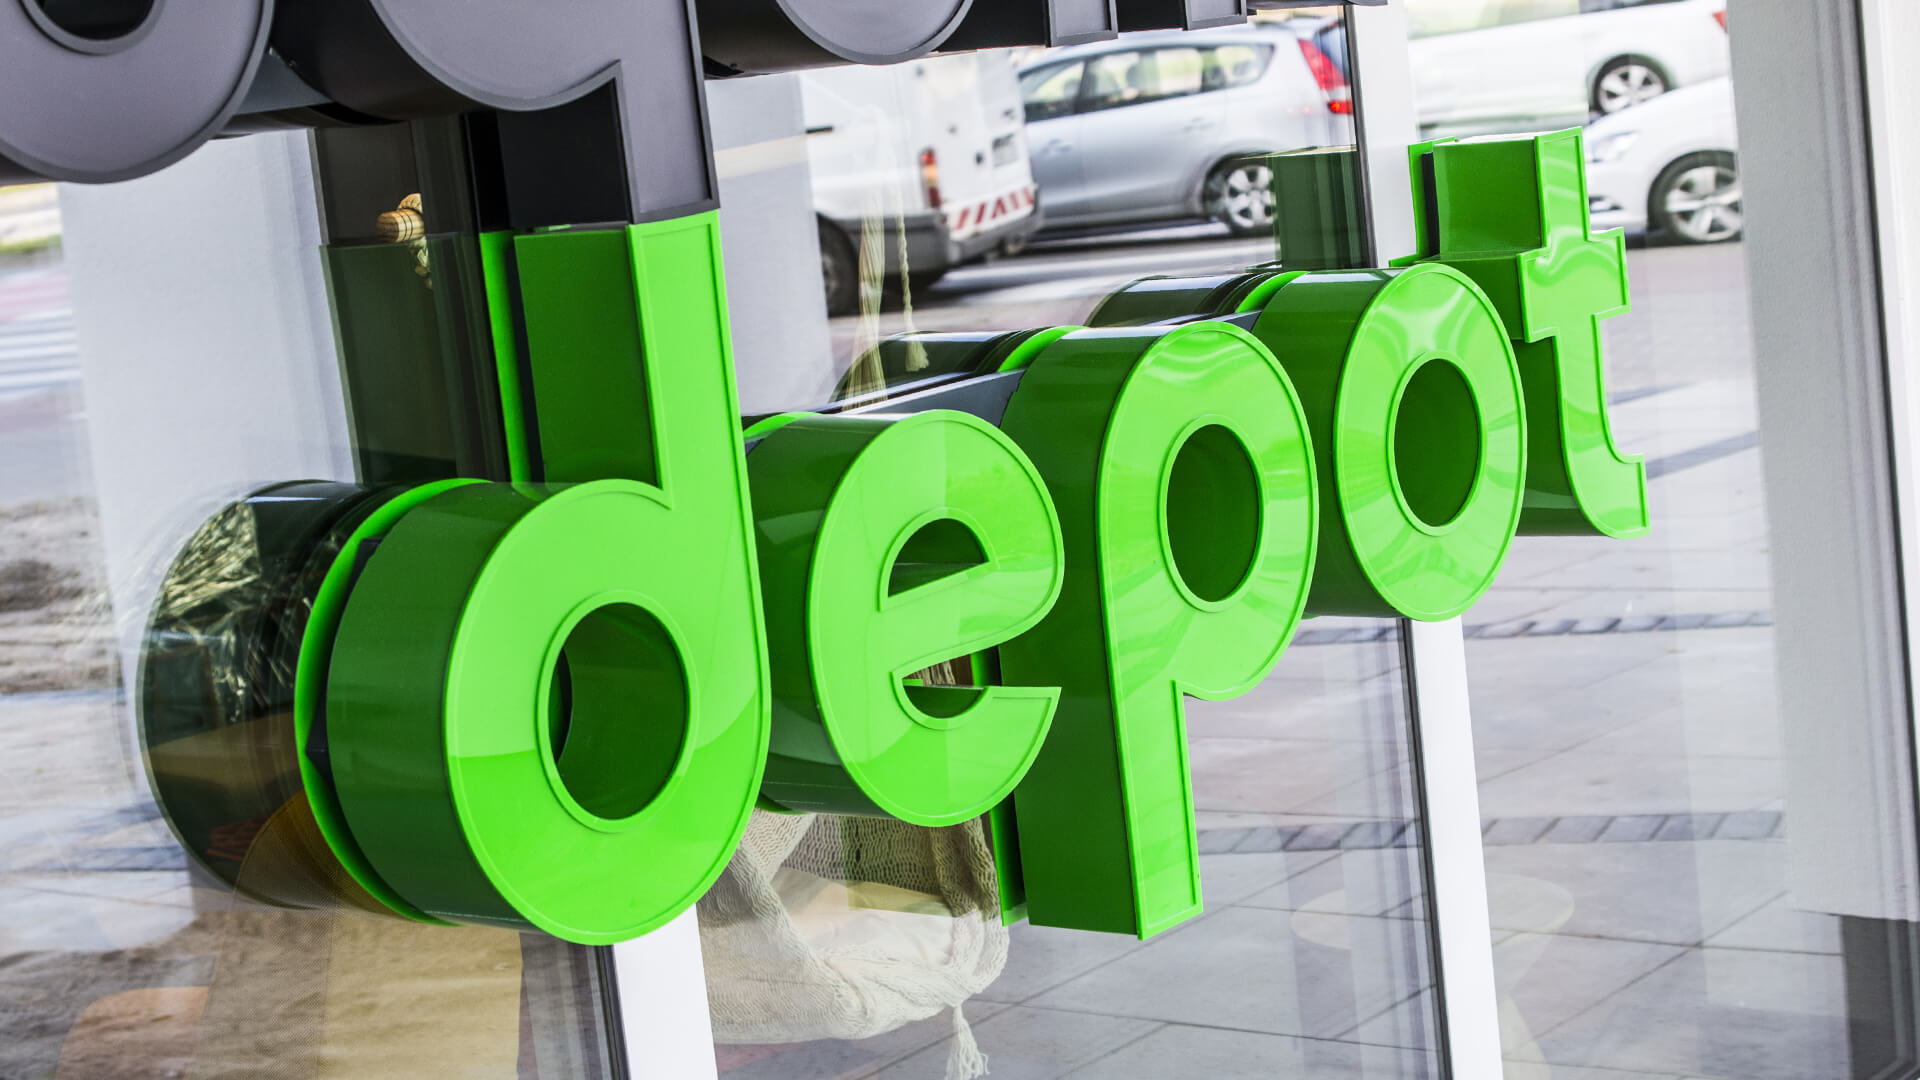 student depot - student-depot-spatial-lettering-lettering-at-the-entry-lettering-at-the-window-lettering-on-the-green-frame-lettering-on-order-logo-firm-writing-lettering-on-the-height-of-eye-lettering-from-plexi-gdansk-przymorze